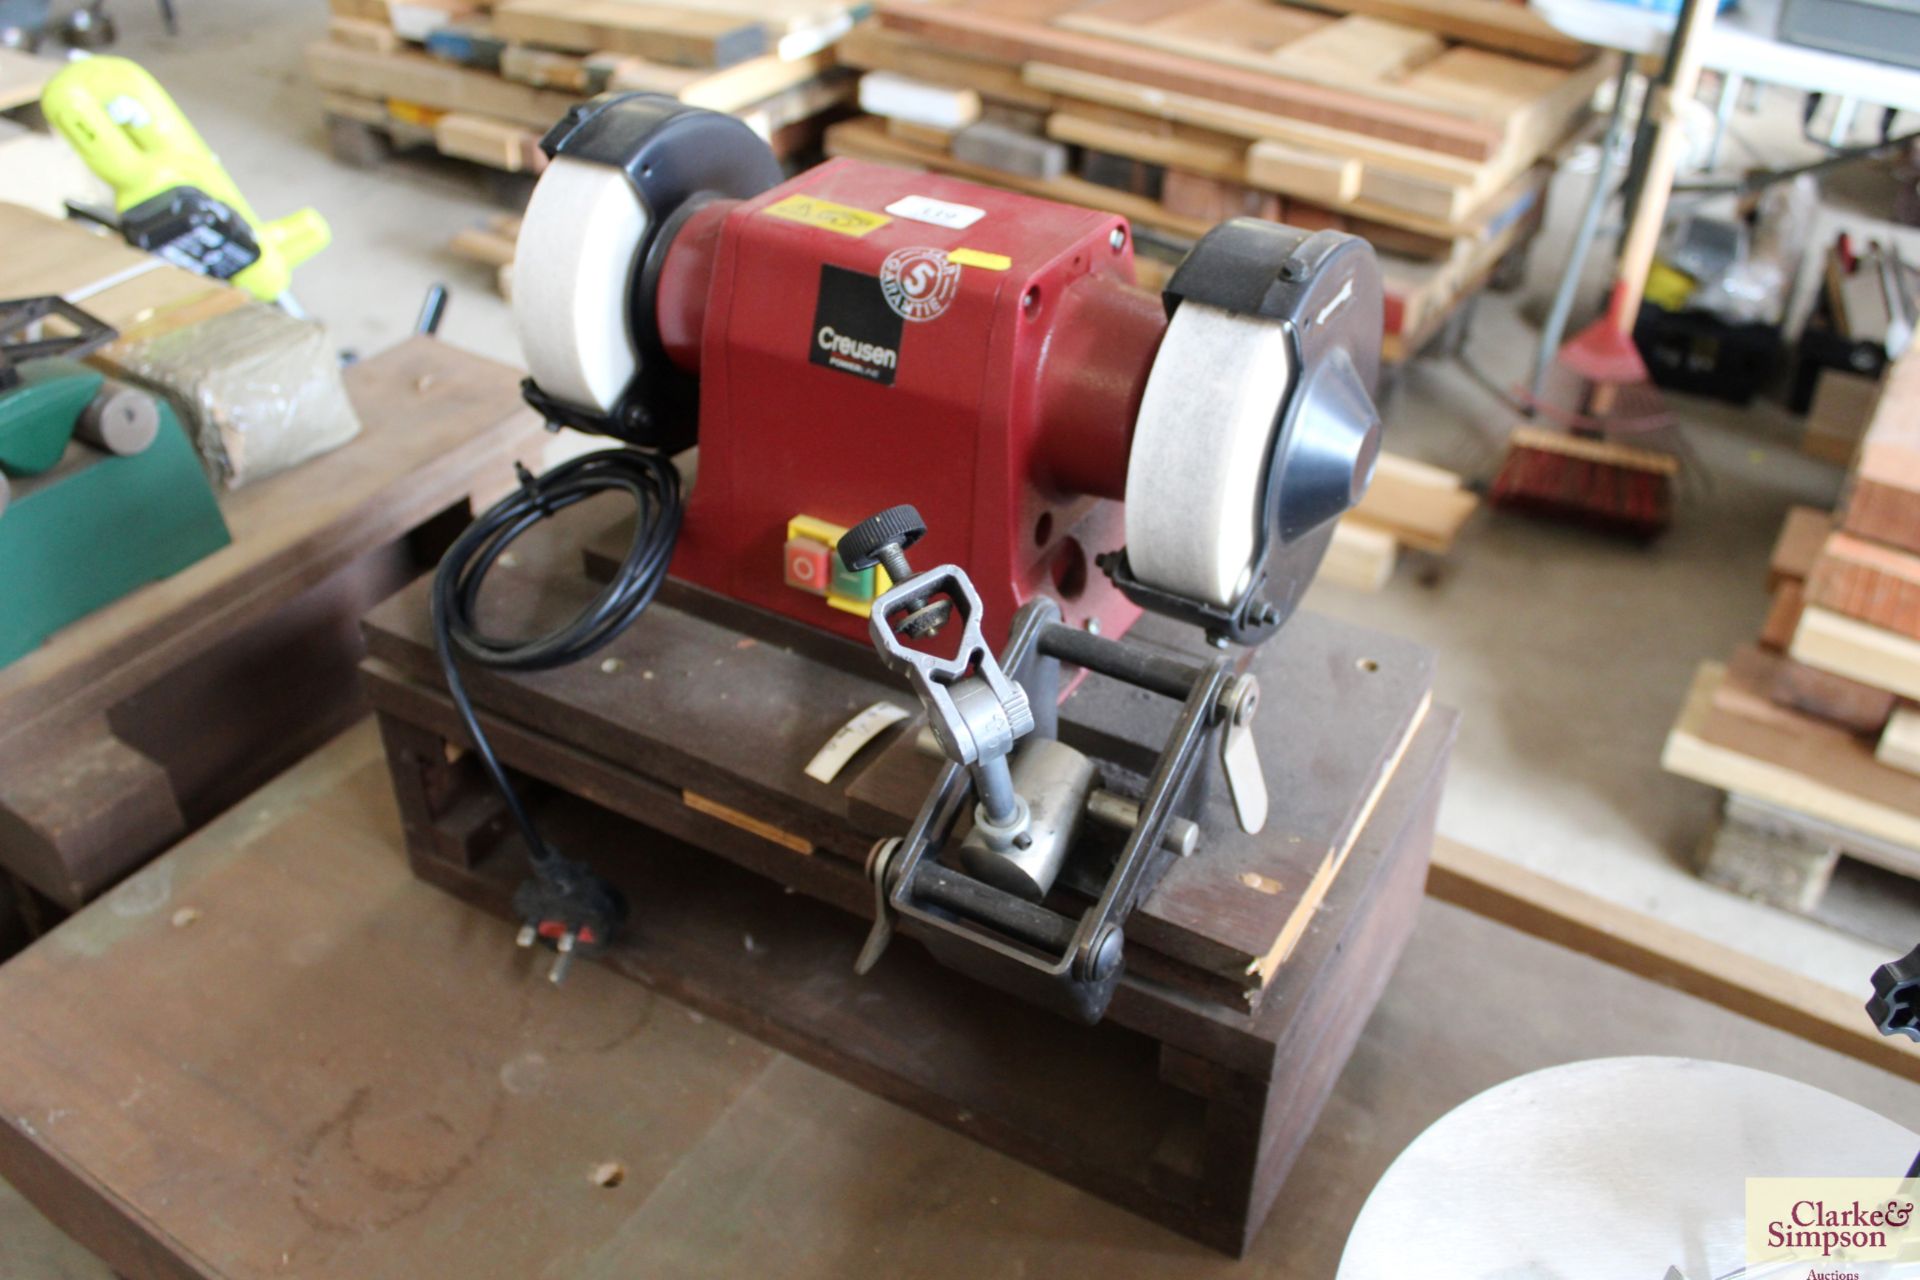 Creusen DS7500TS 240v double bench grinder with sharpening guide on wooden plinth. - Image 2 of 6